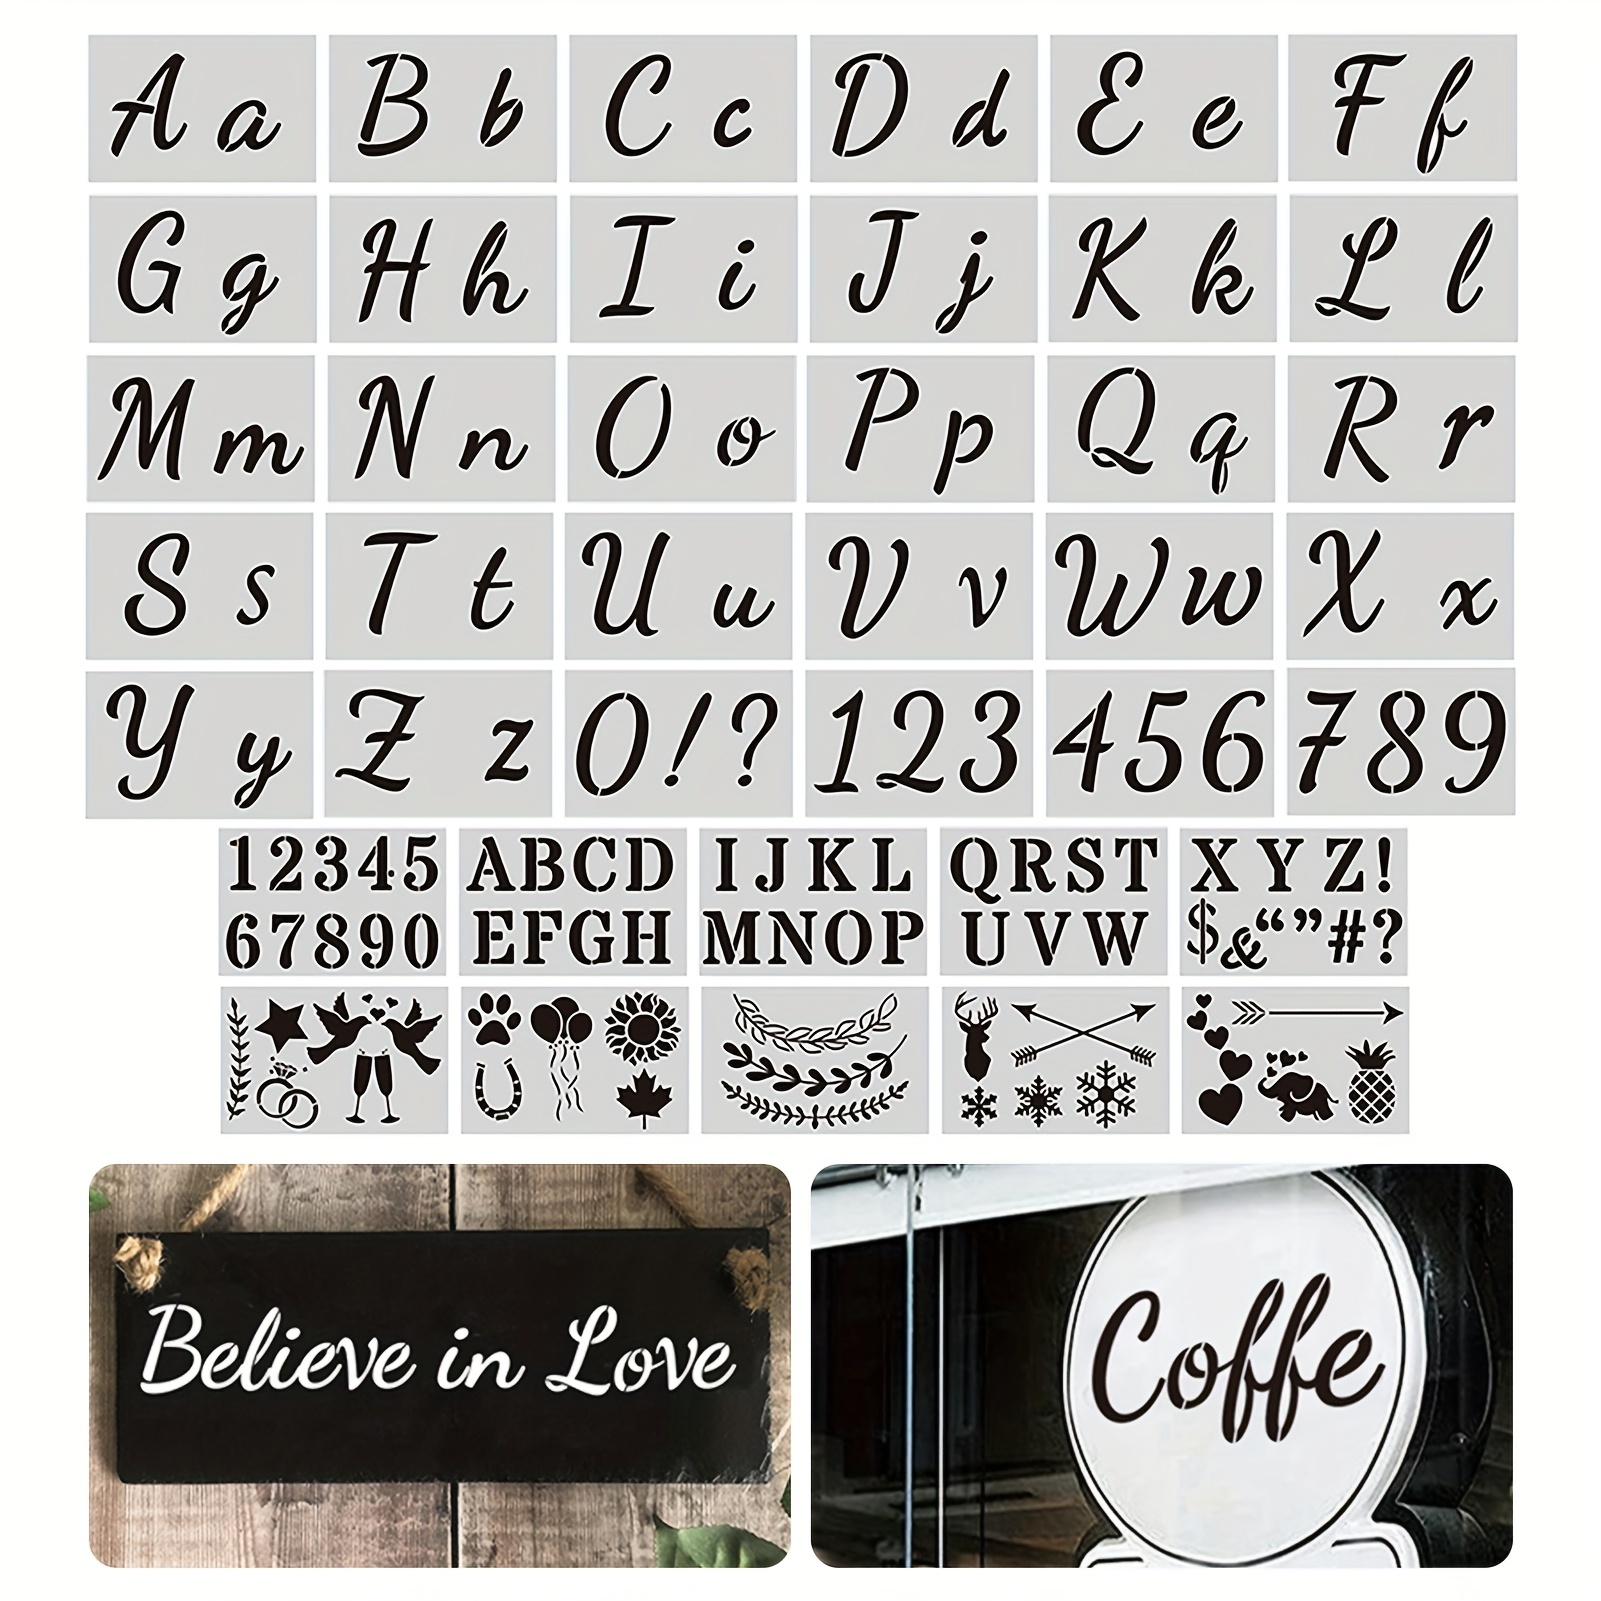 Buy Letter Stencils for Painting on Wood - Alphabet Stencils with  Calligraphy Font Upper and Lowercase Letters - Reusable Plastic Art Craft  Stencils with Numbers and Signs - Set of 36 PCs